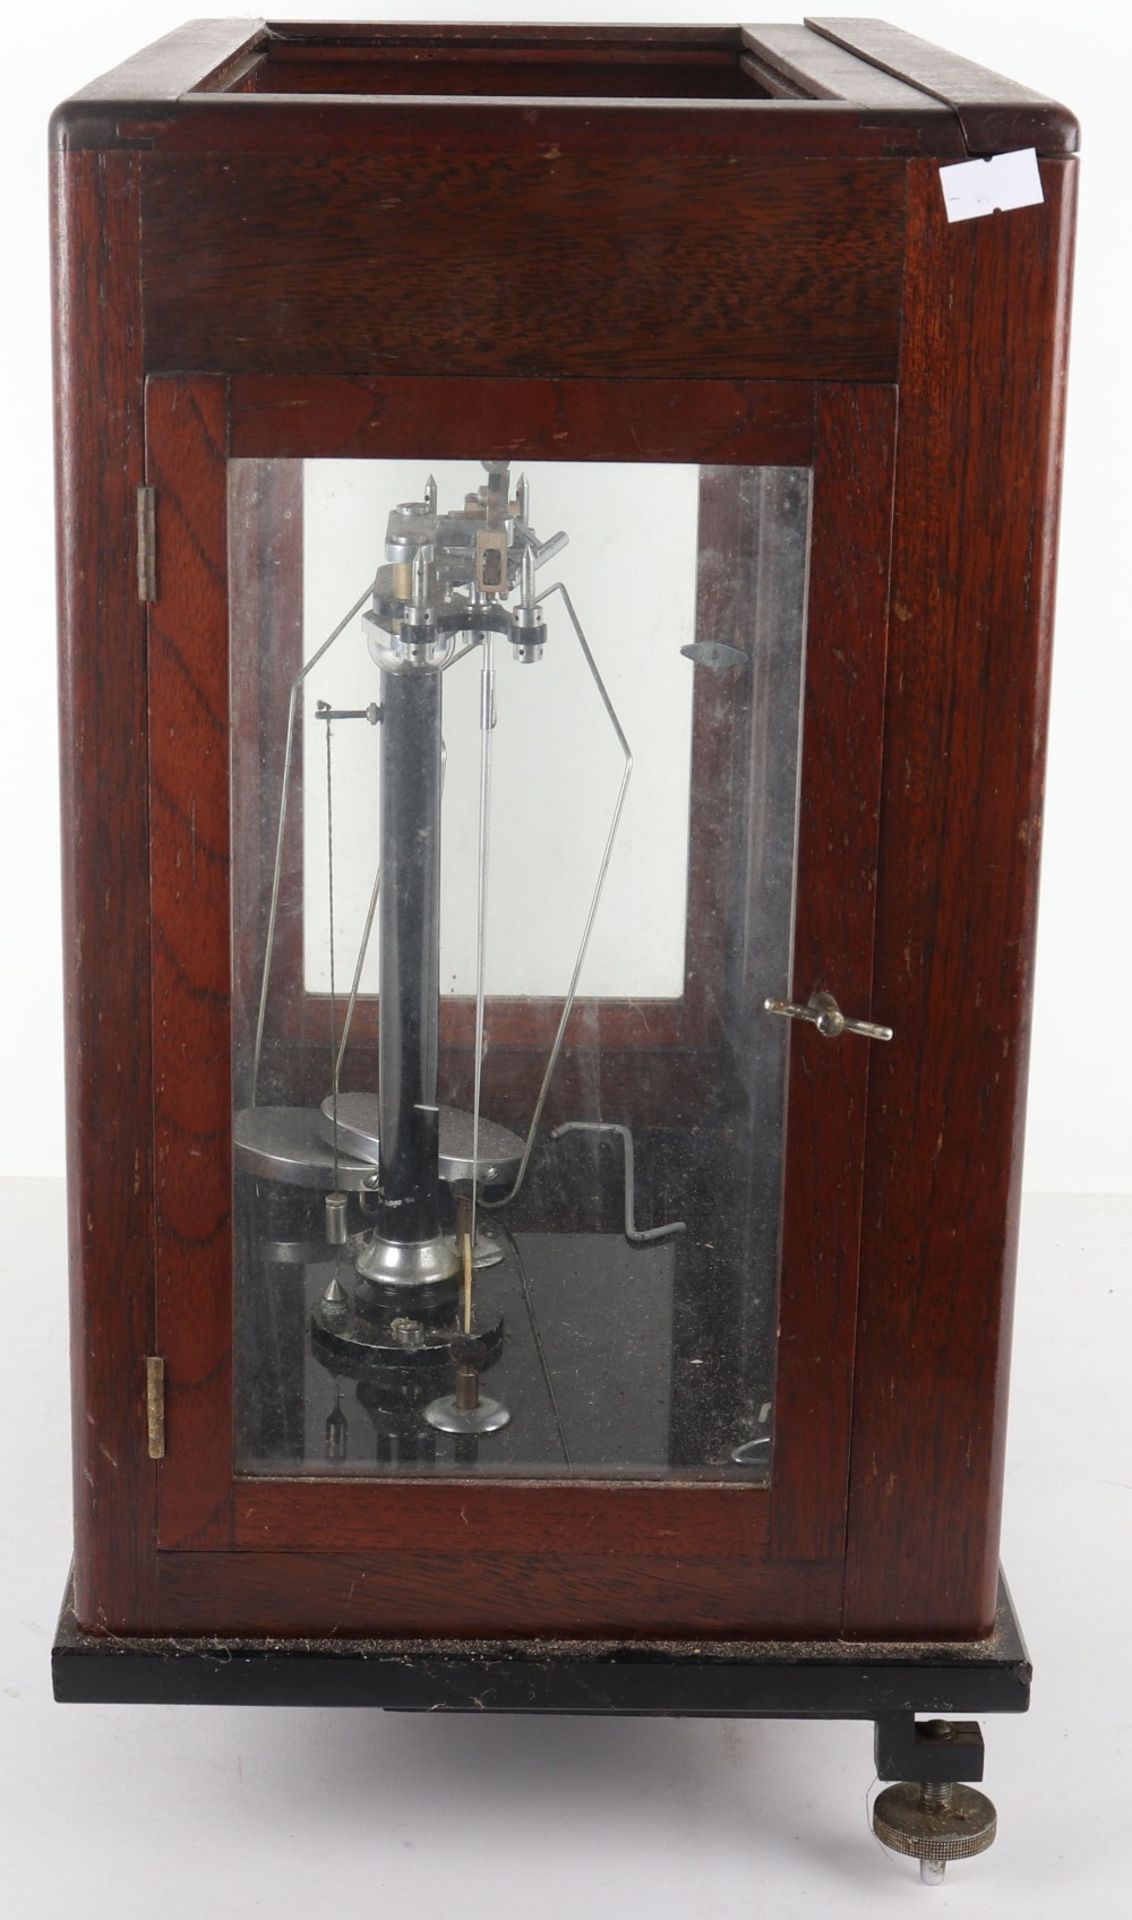 A Townson & Mercer set of scales, in glass, oak and mahogany case - Image 8 of 10